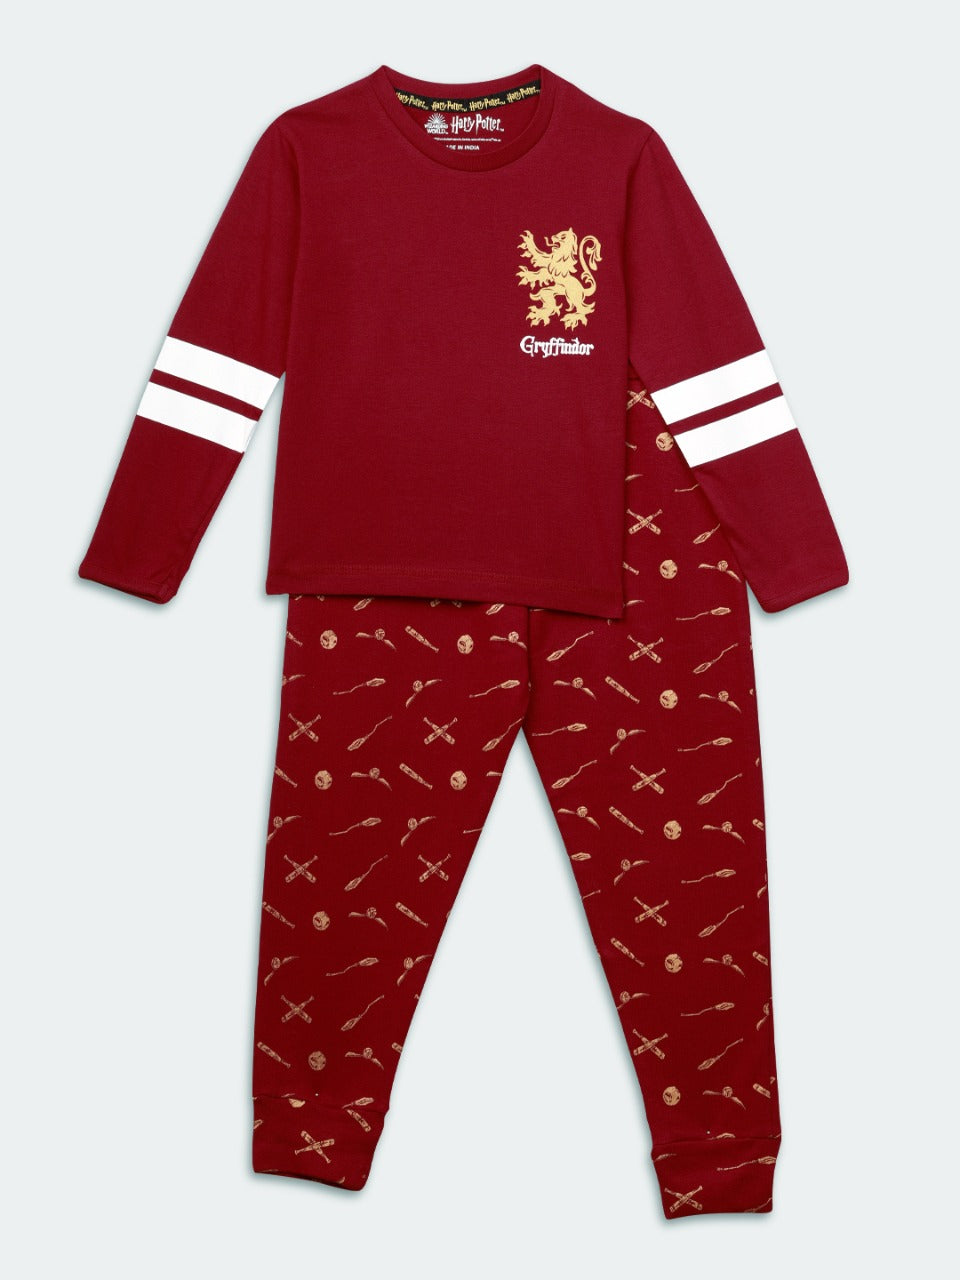 harry potter quidditch nap chief boys and girls 100% organic cotton cozy night wear